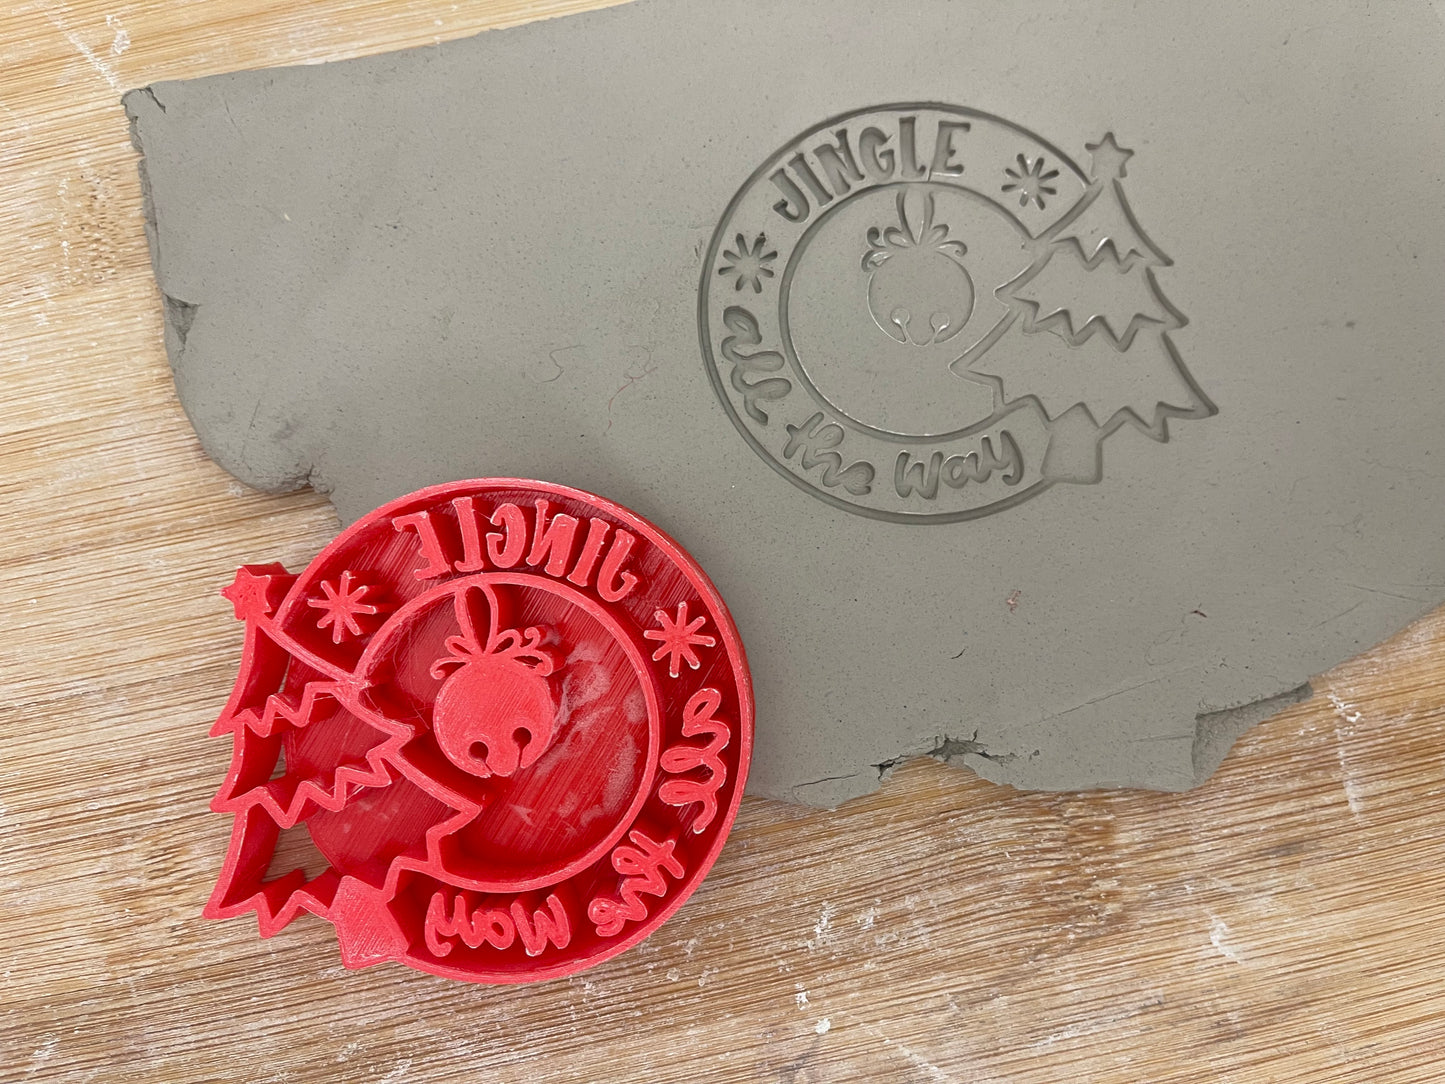 Christmas Tree w/ "Jingle all the way" word stamp - plastic 3D printed, multiple sizes